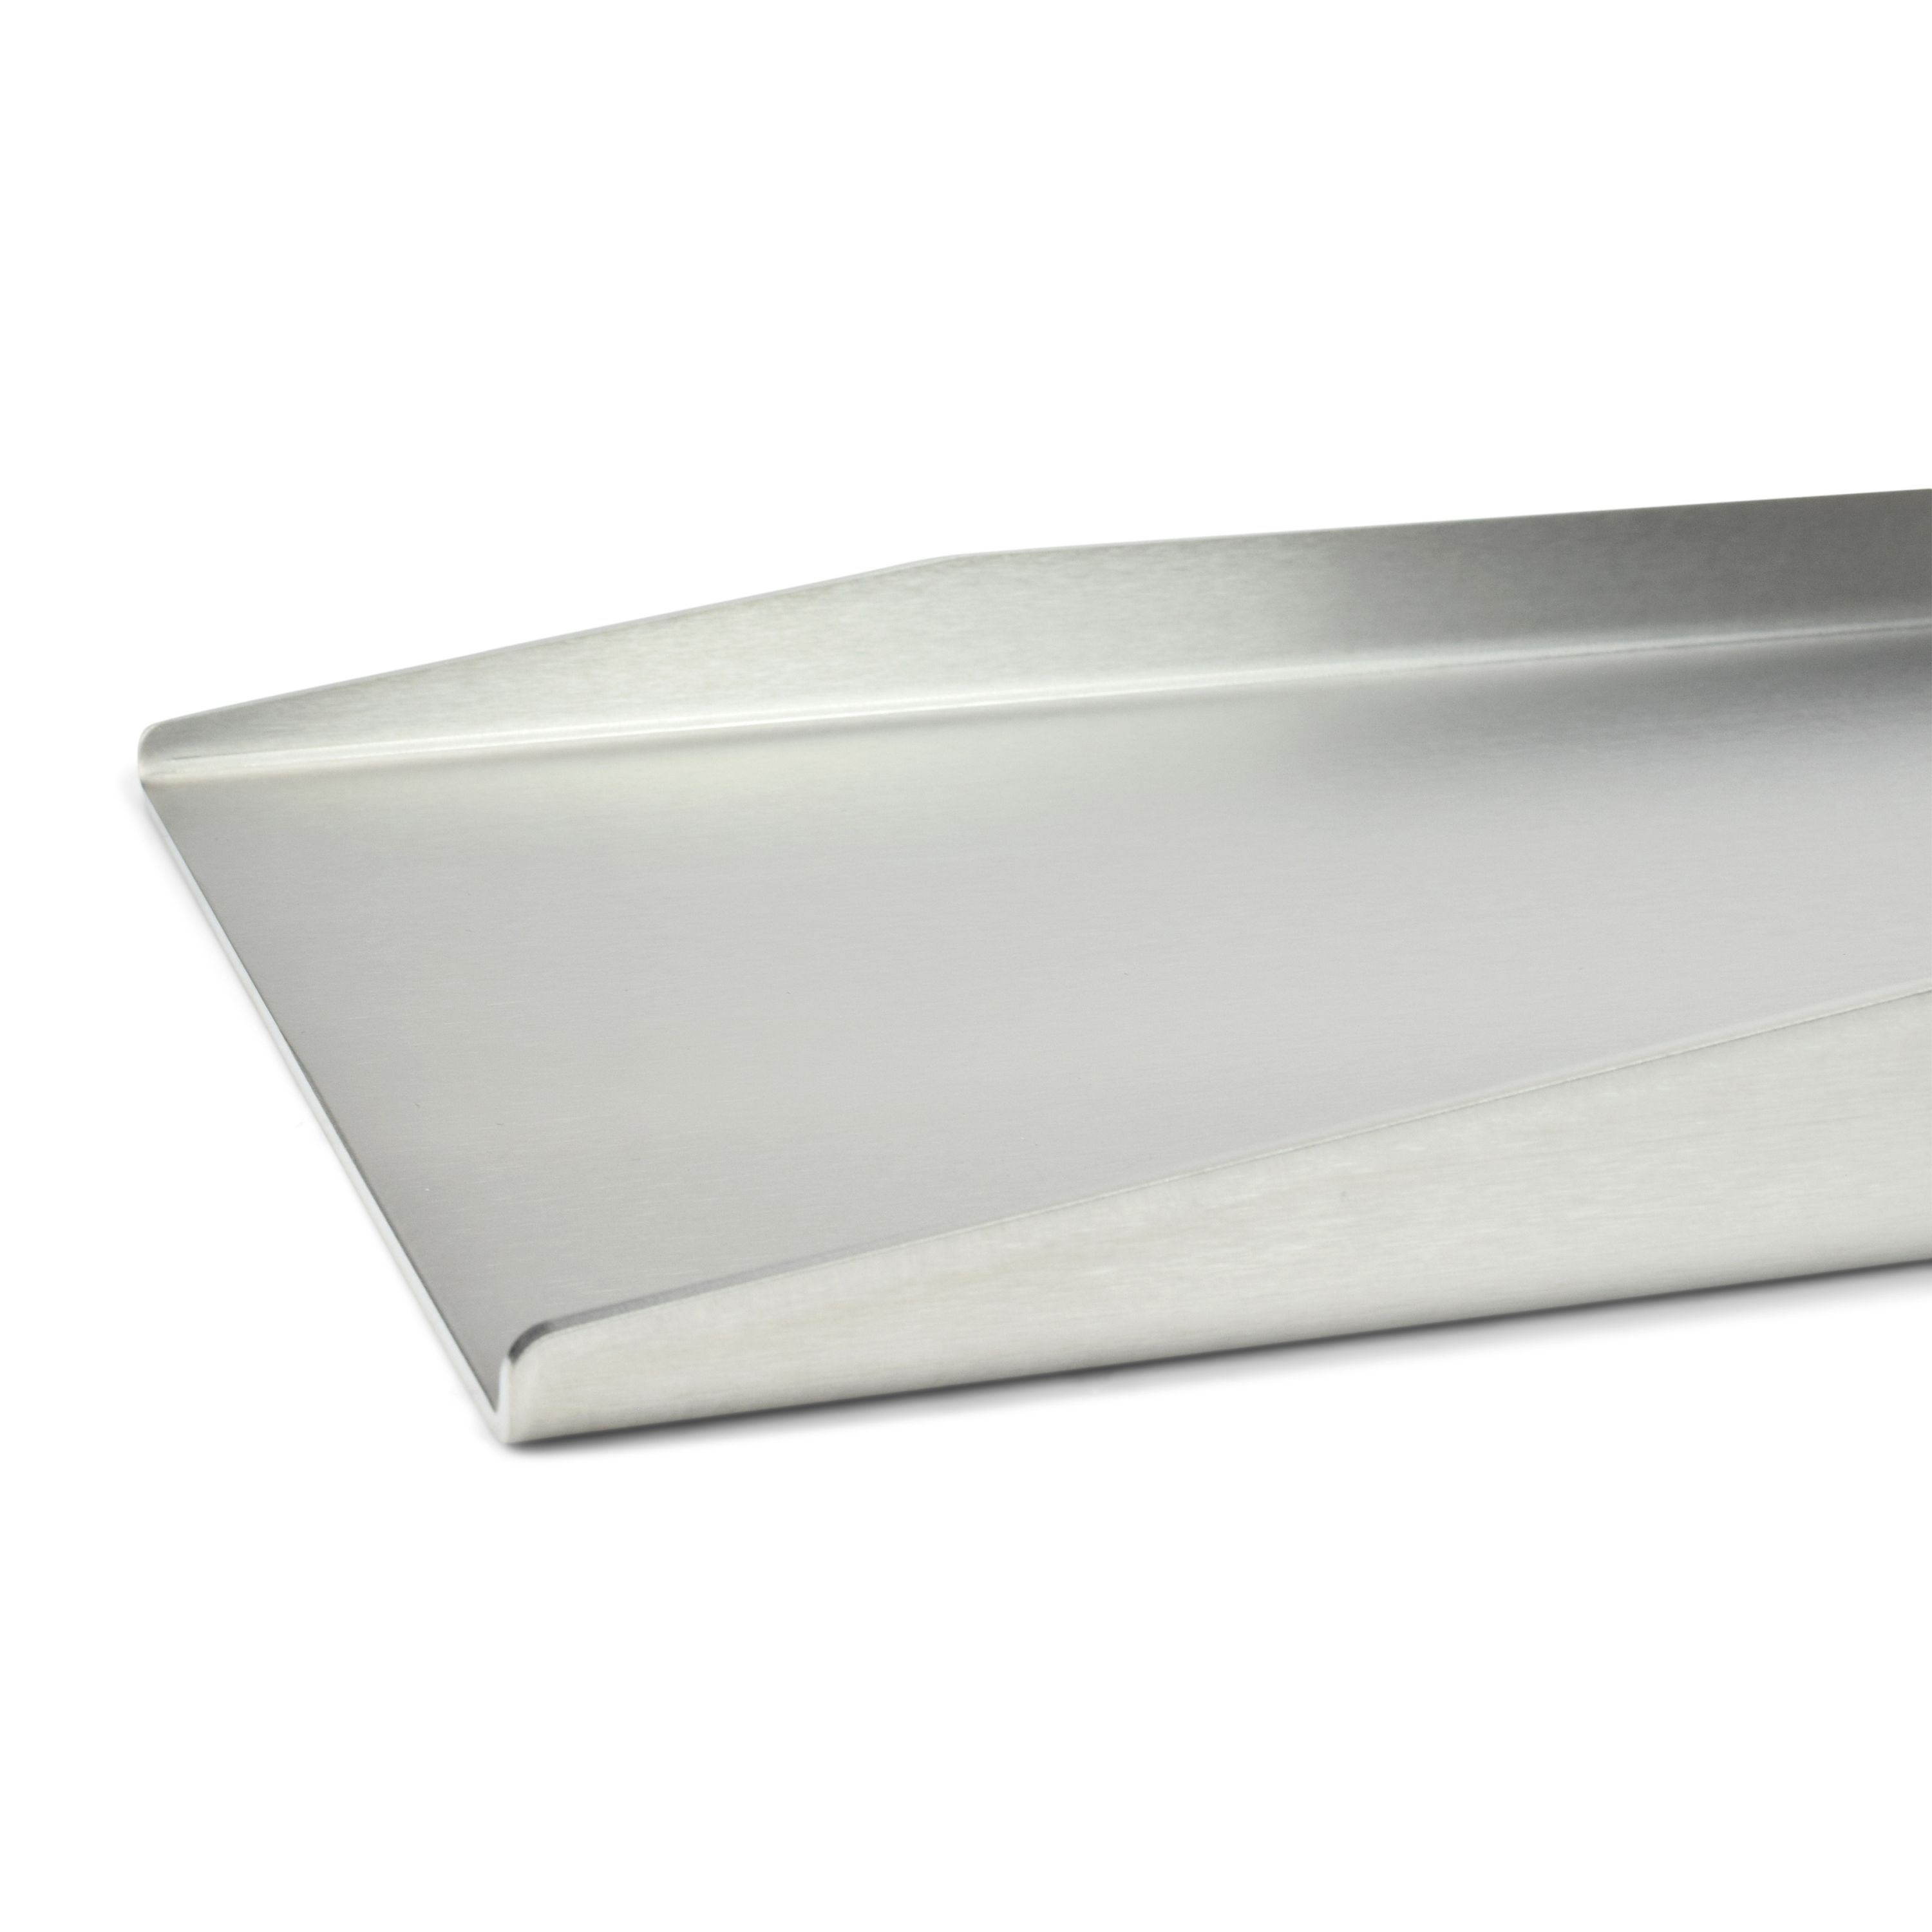 Stainless Steel Grill Plate - Plancha 48 x 34cm for Weber Genesis 2 and Broil King Regal Imperial